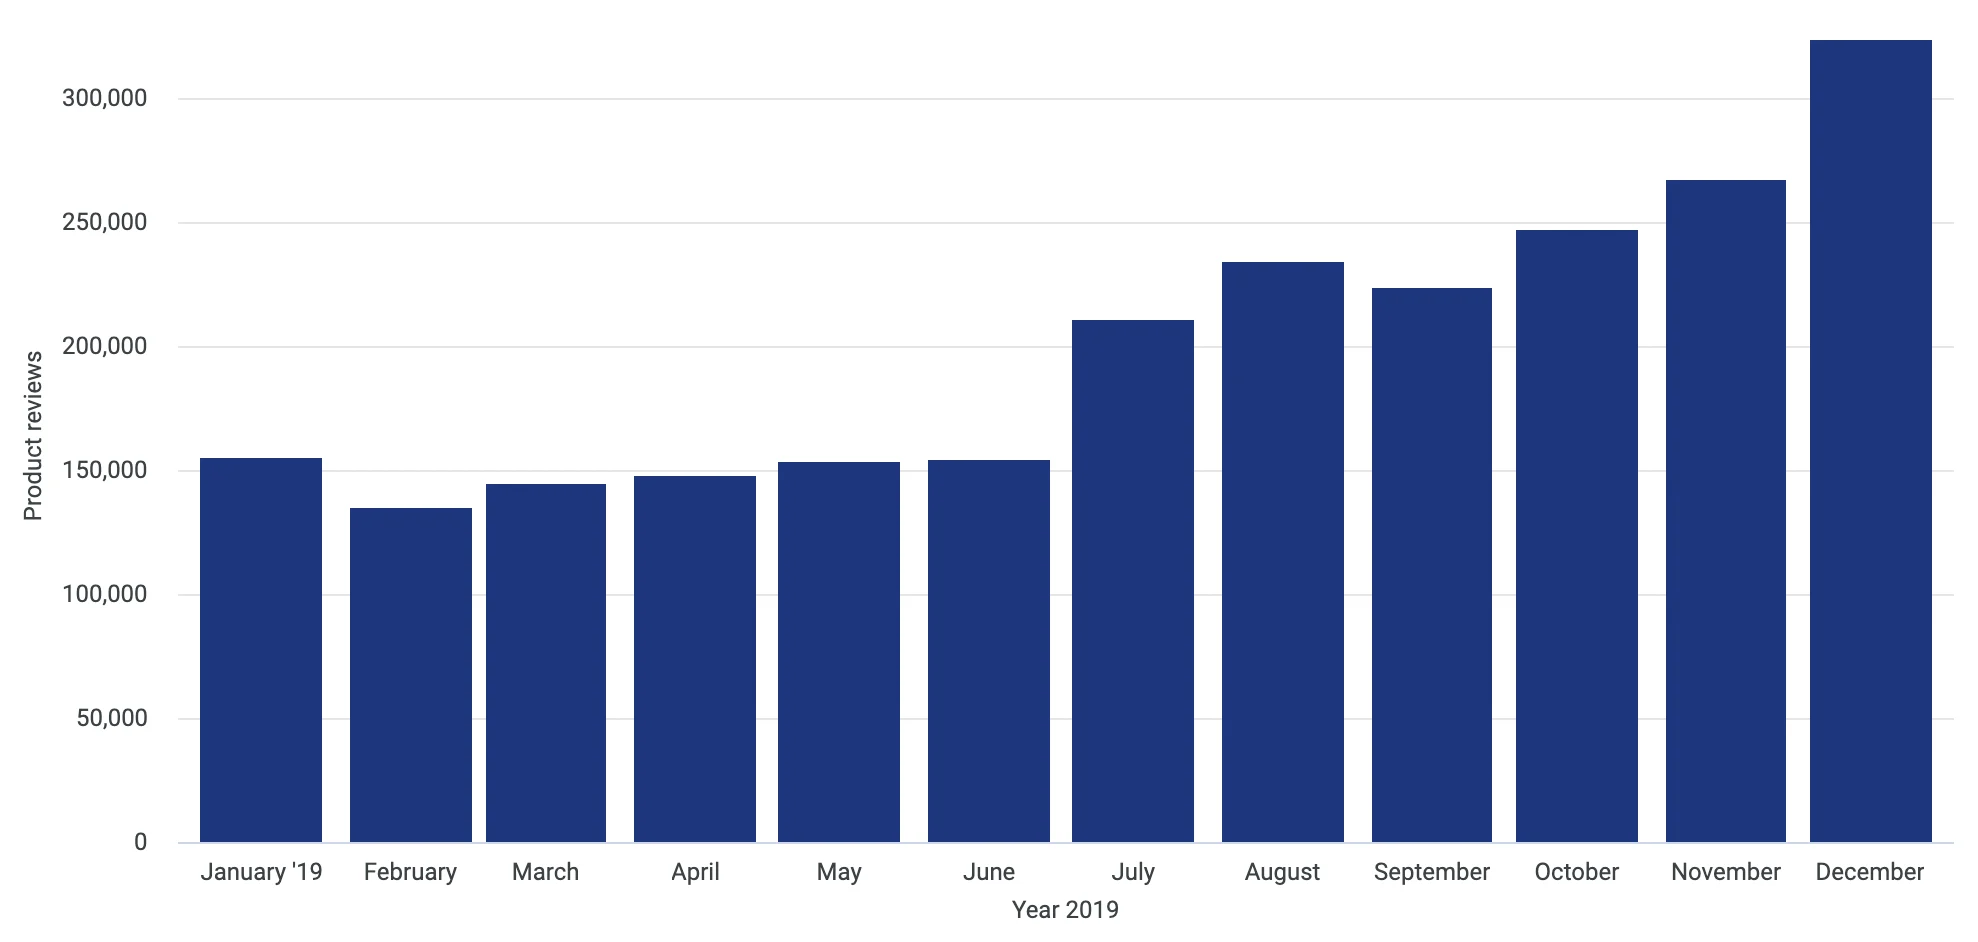 Product reviews left on Trustpilot.com between January 1st 2019 and December 31st 2019. Here, we can observe a significant increase in service reviews from July onwards.